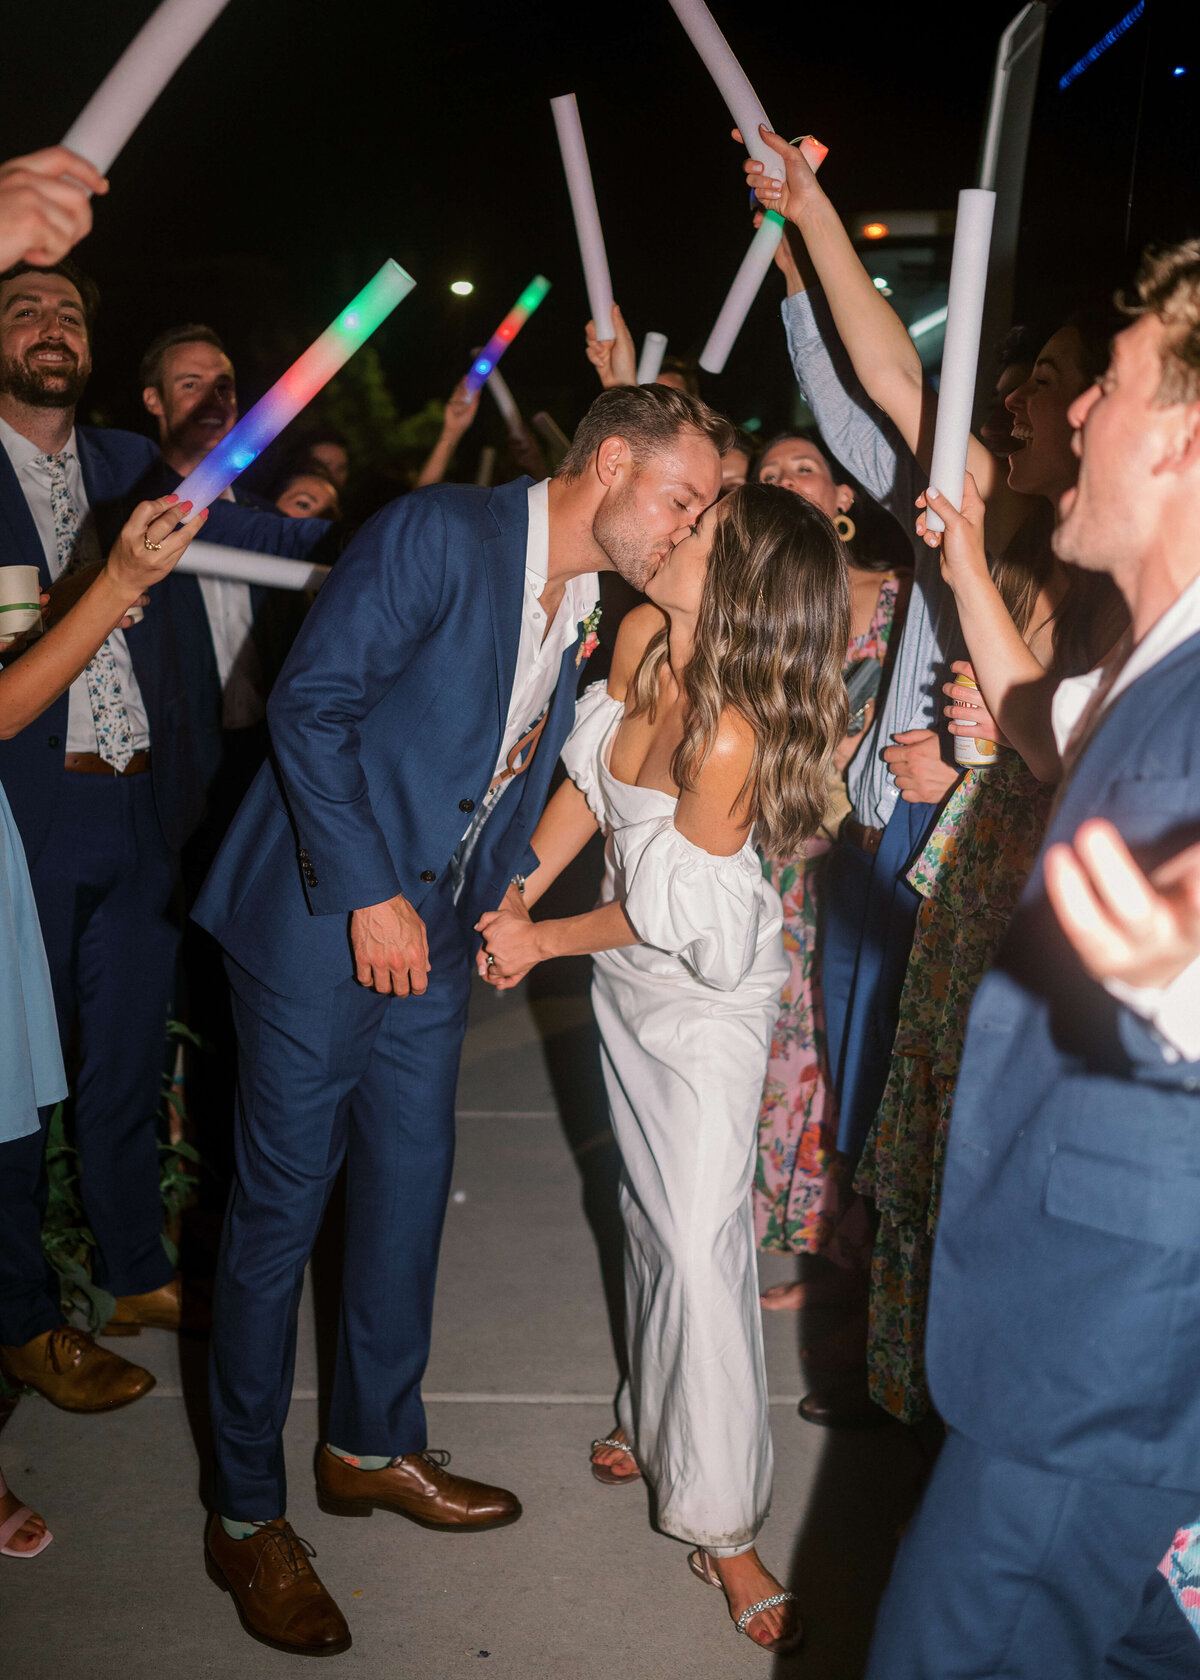 Virginia wedding photographer photographs bride and groom kissing while their friends wave colored light sticks during their grand exit.